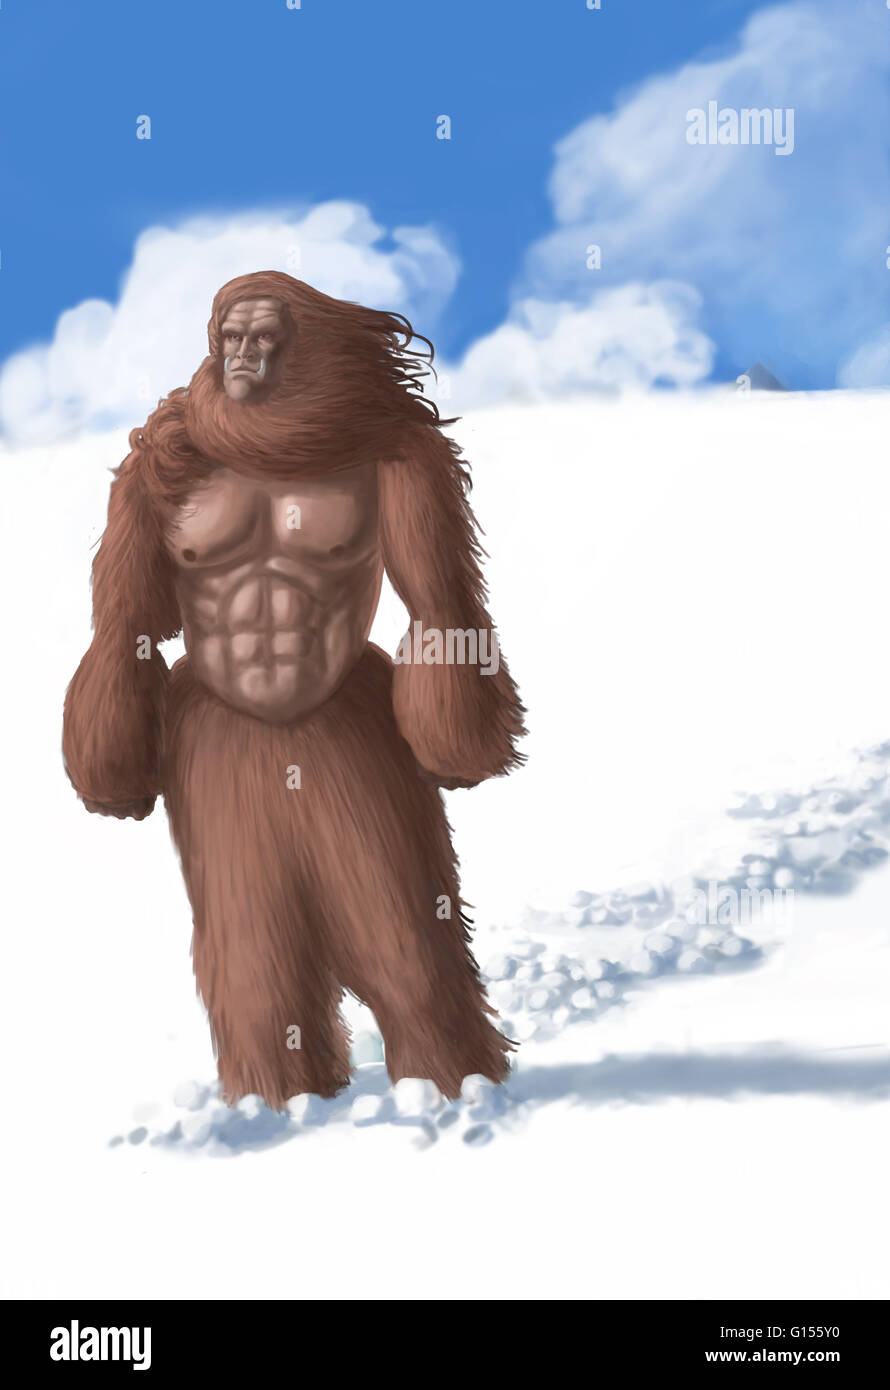 An illustration of the yeti. The yeti or abominable snowman is said to live in the Himalayas of Nepal. It is ape-like, larger than a human and similar to big foot. Stock Photo